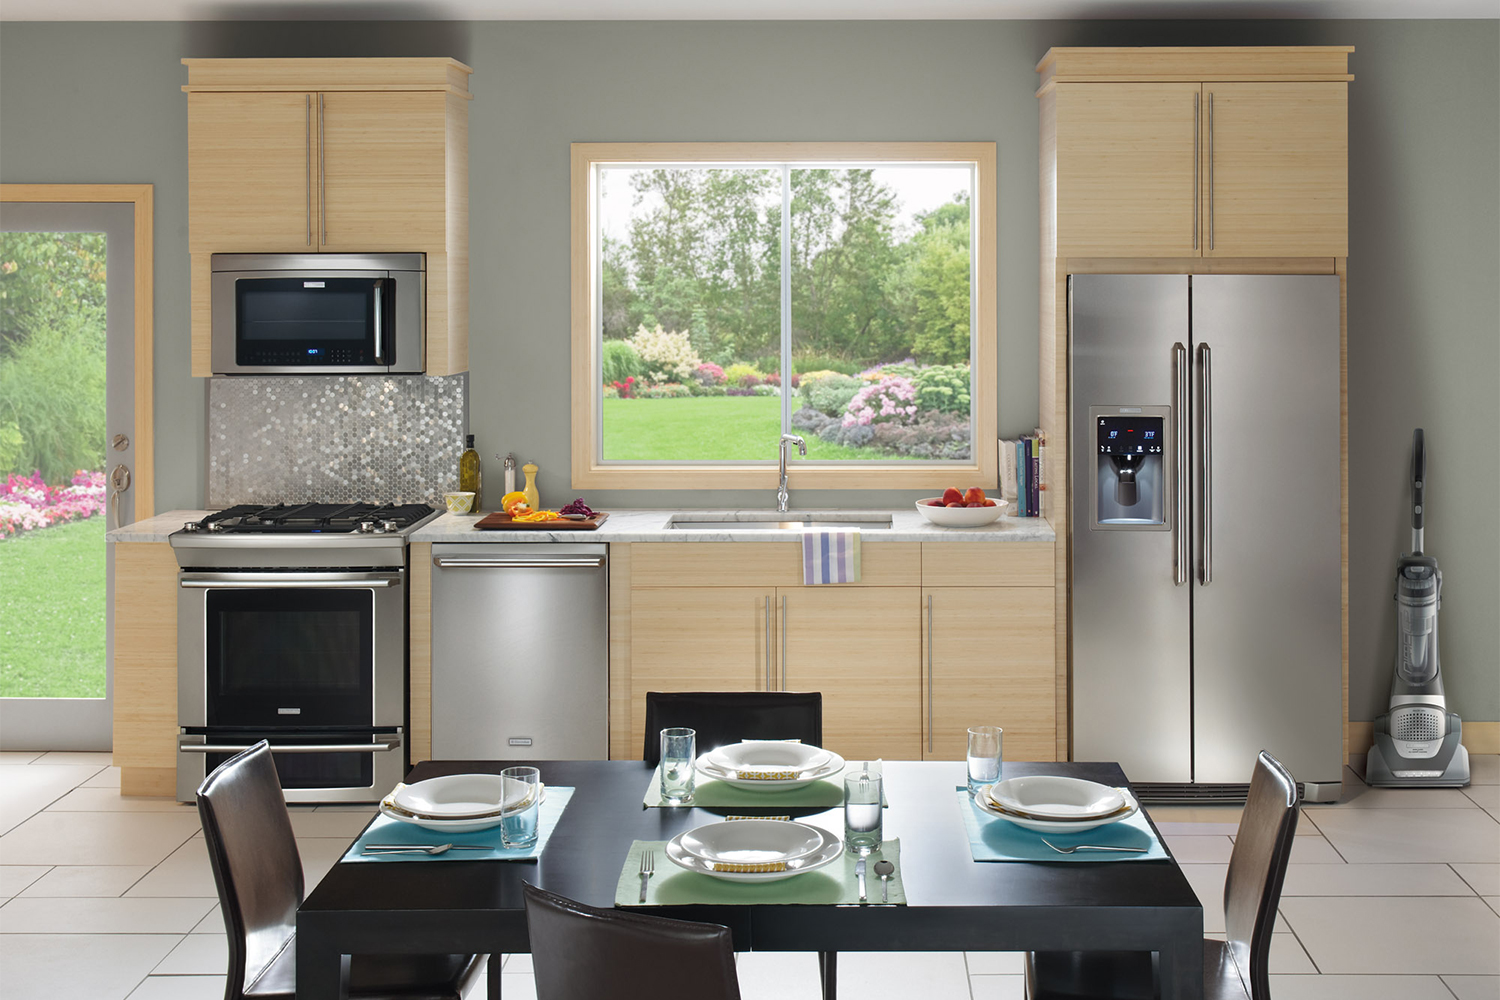 Kitchen - Dining, Appliances, Cleaning & More